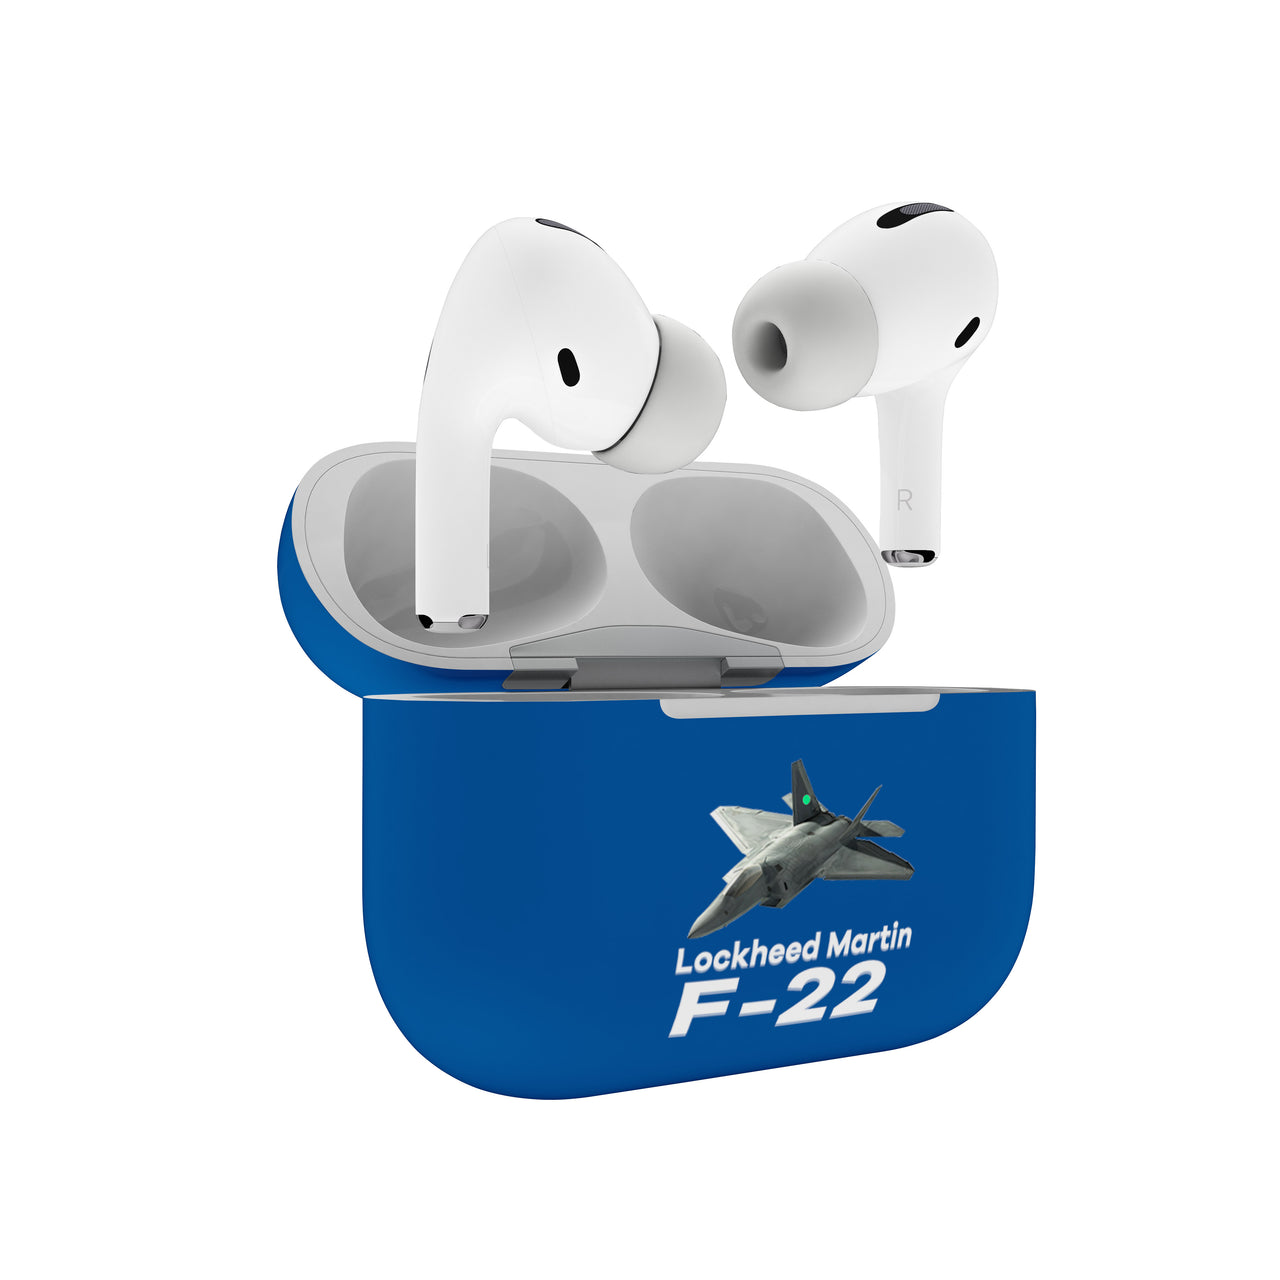 The Lockheed Martin F22 Designed AirPods  Cases